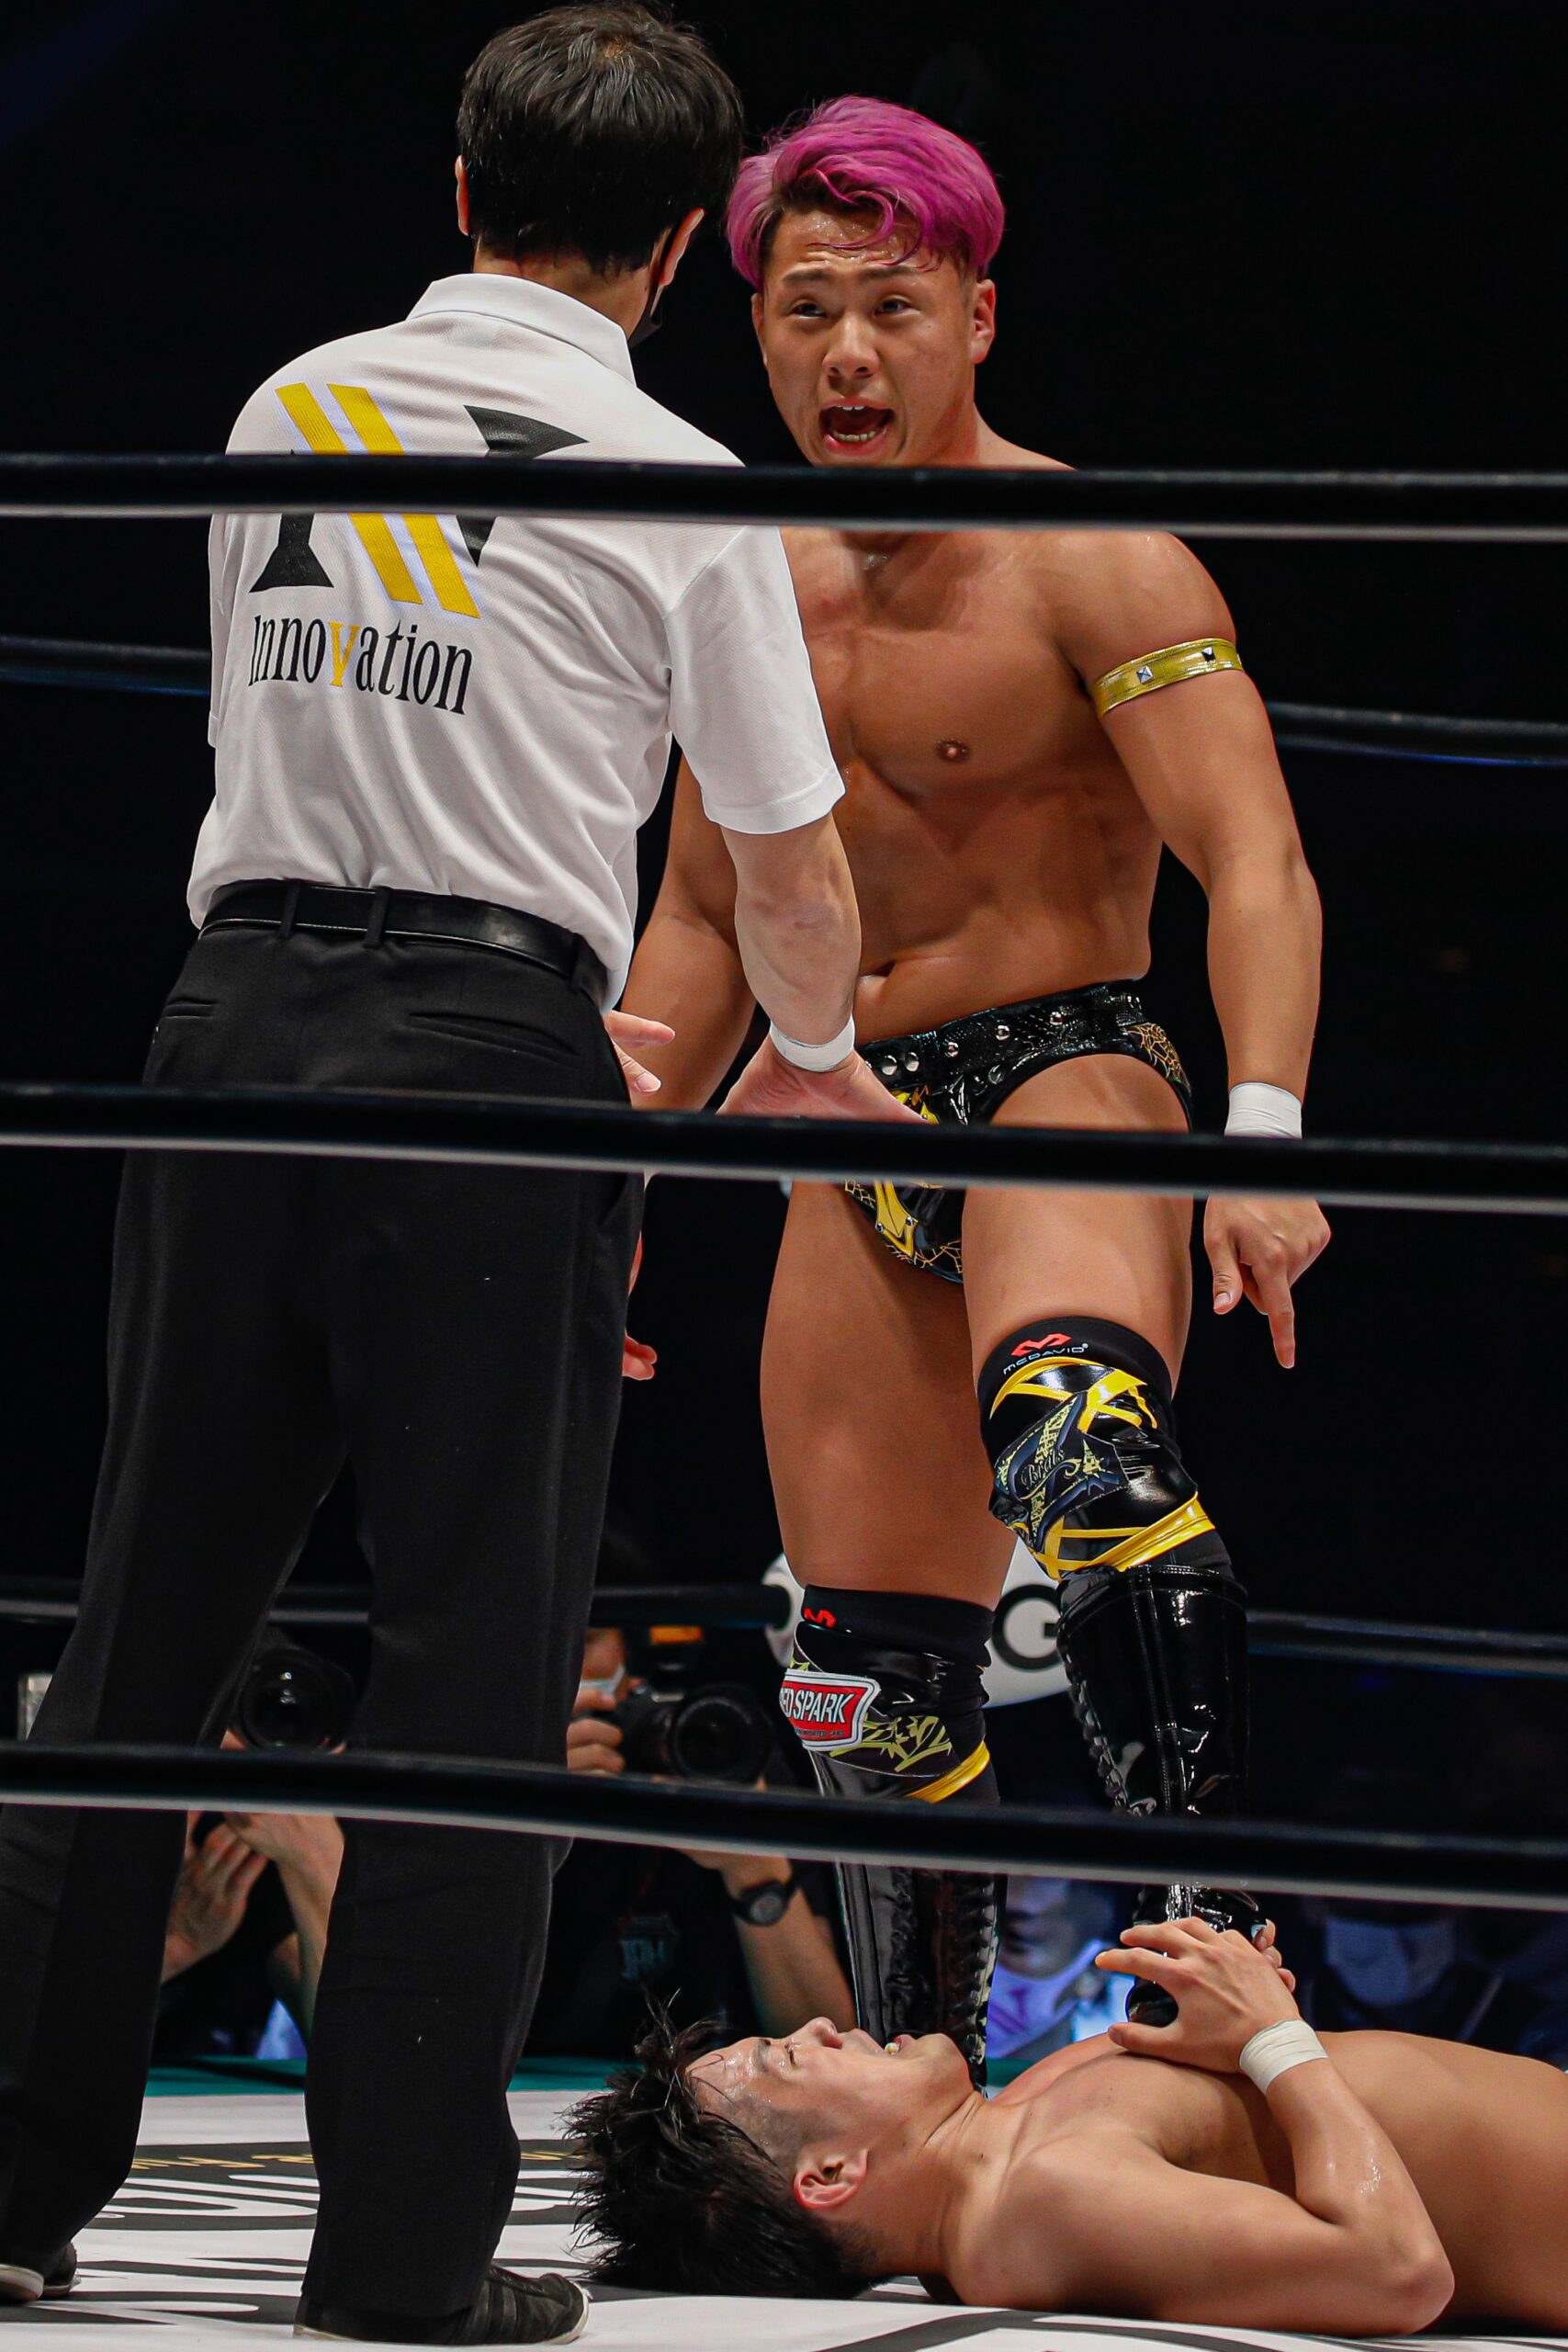 SB KENTo argues with an official